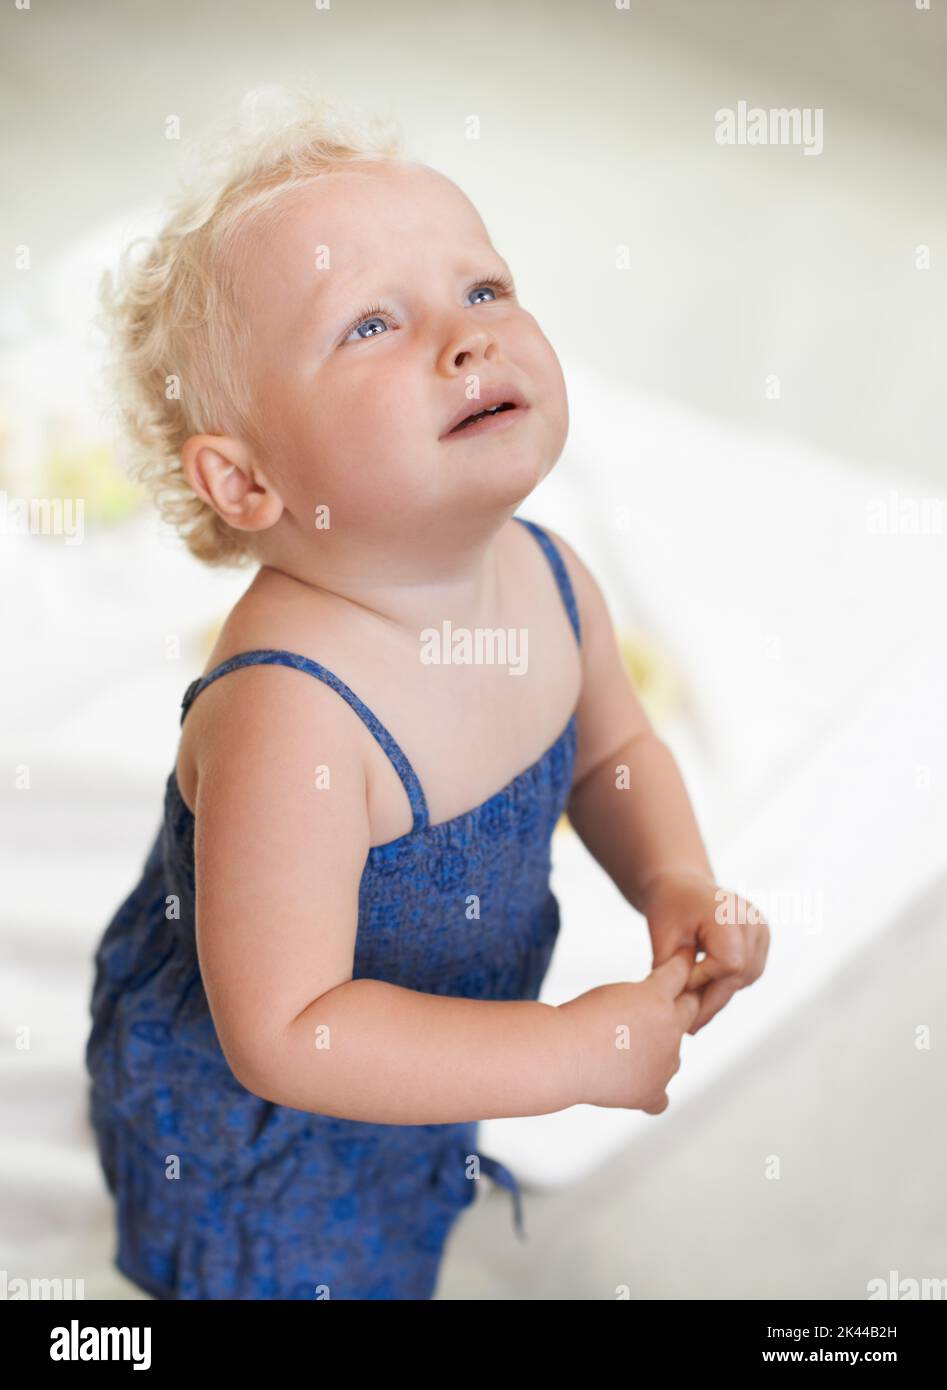 Separation anxiety. An unhappy baby girl looking up with tears in her eyes. Stock Photo